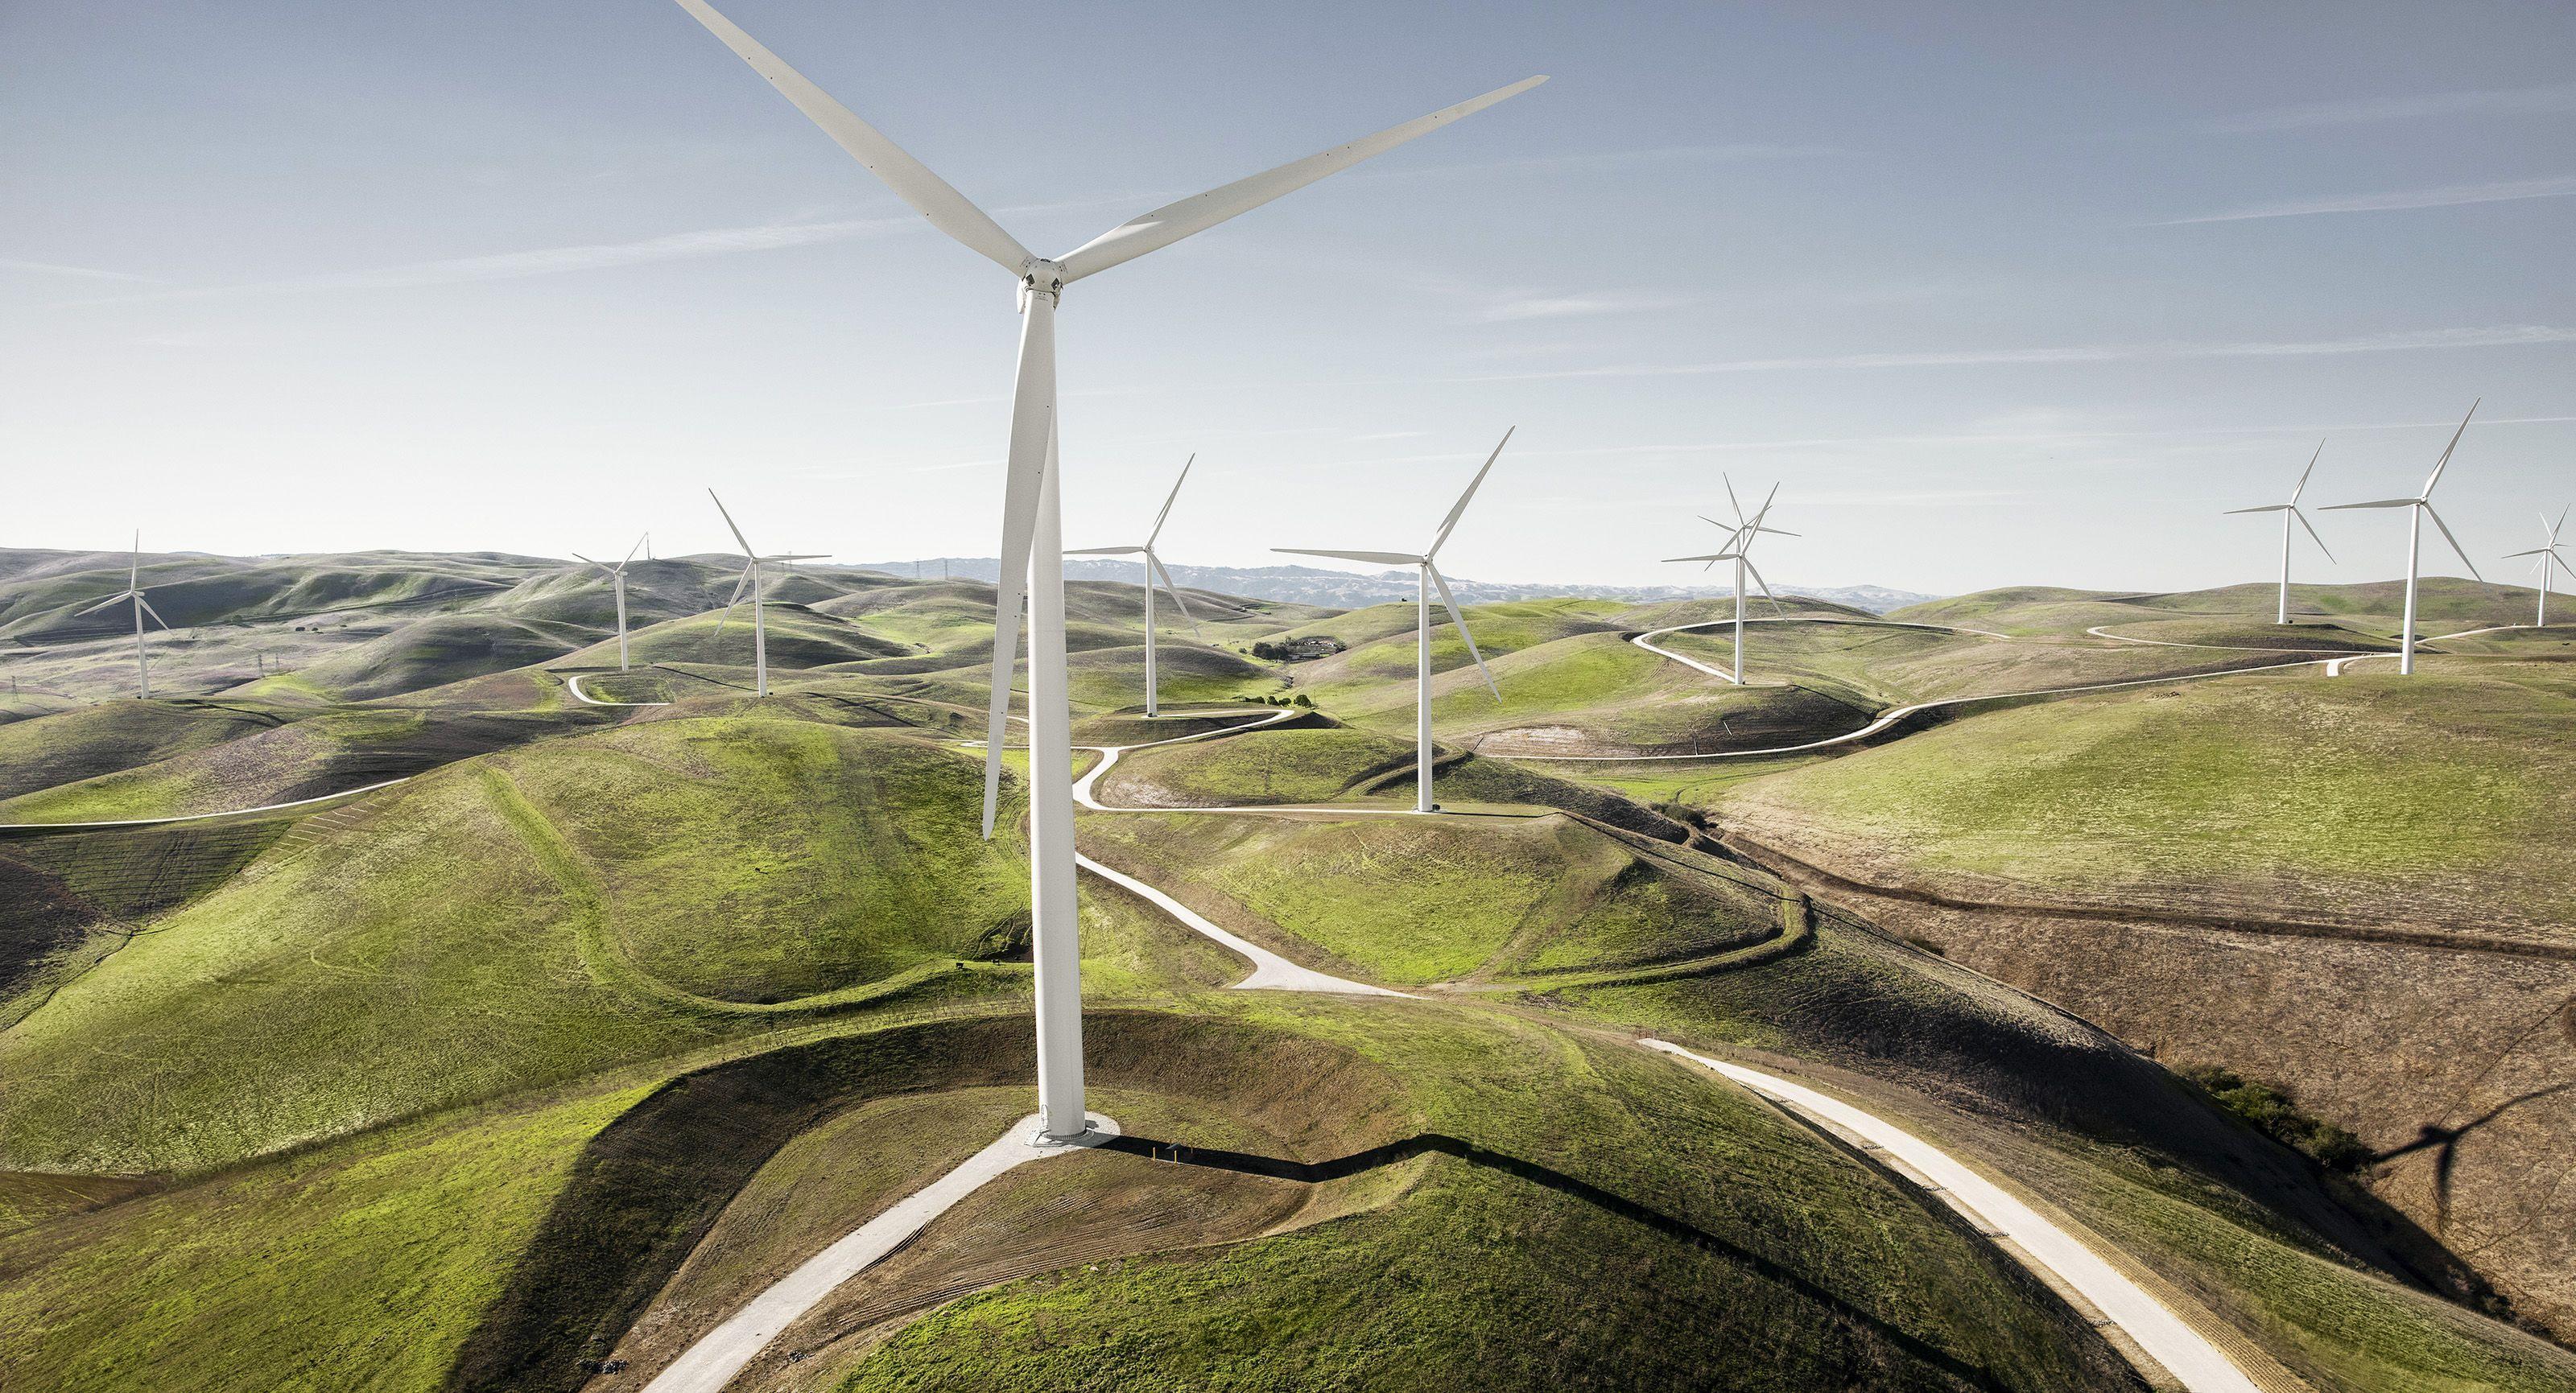 China will build the largest wind turbine in history